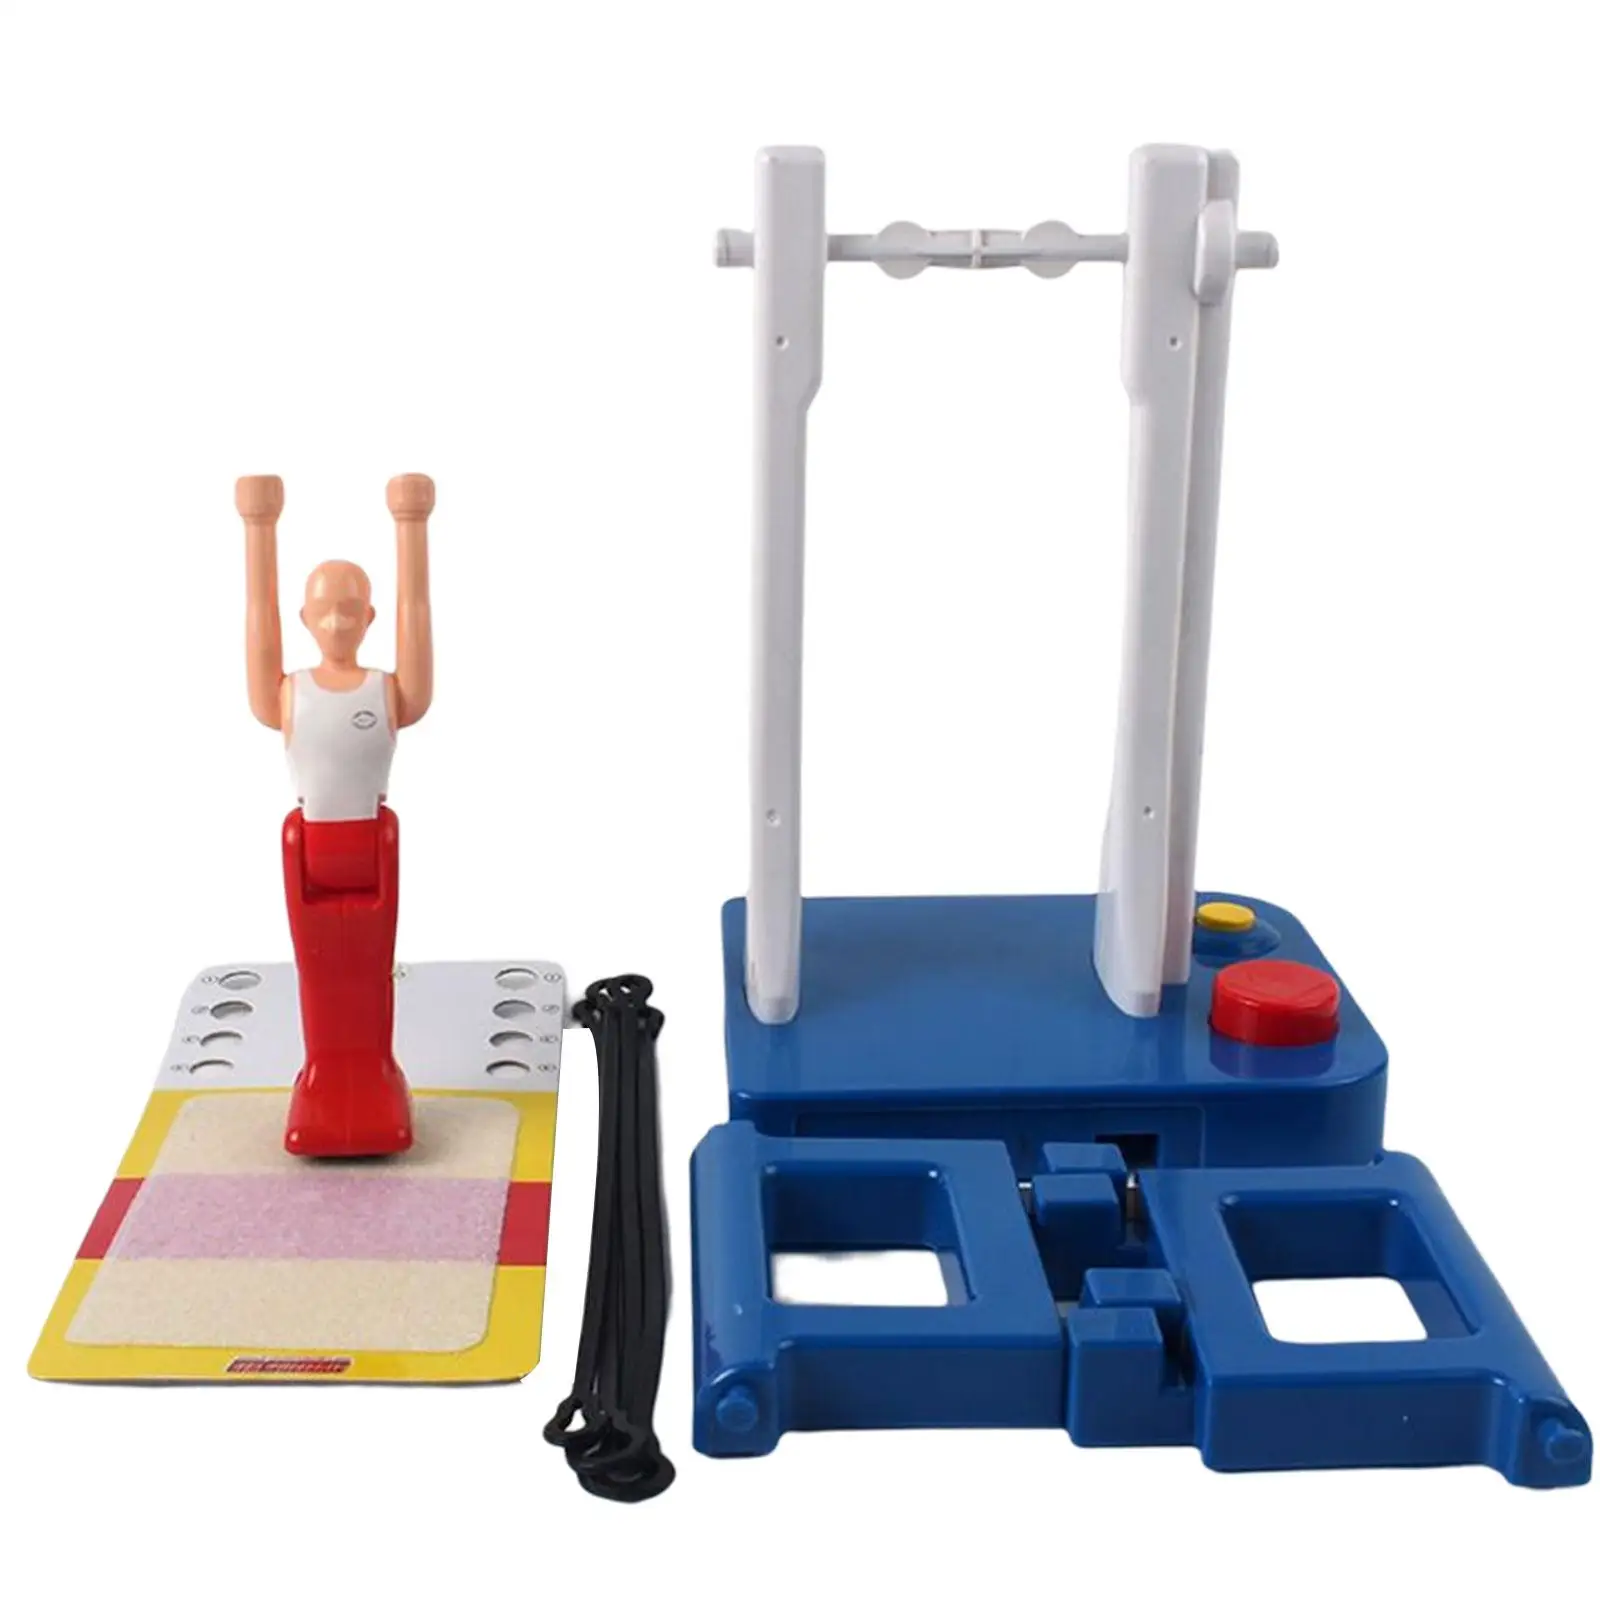 Simulation Gymnastic Machine Teaching Aids Early Education Toys Portable Gifts